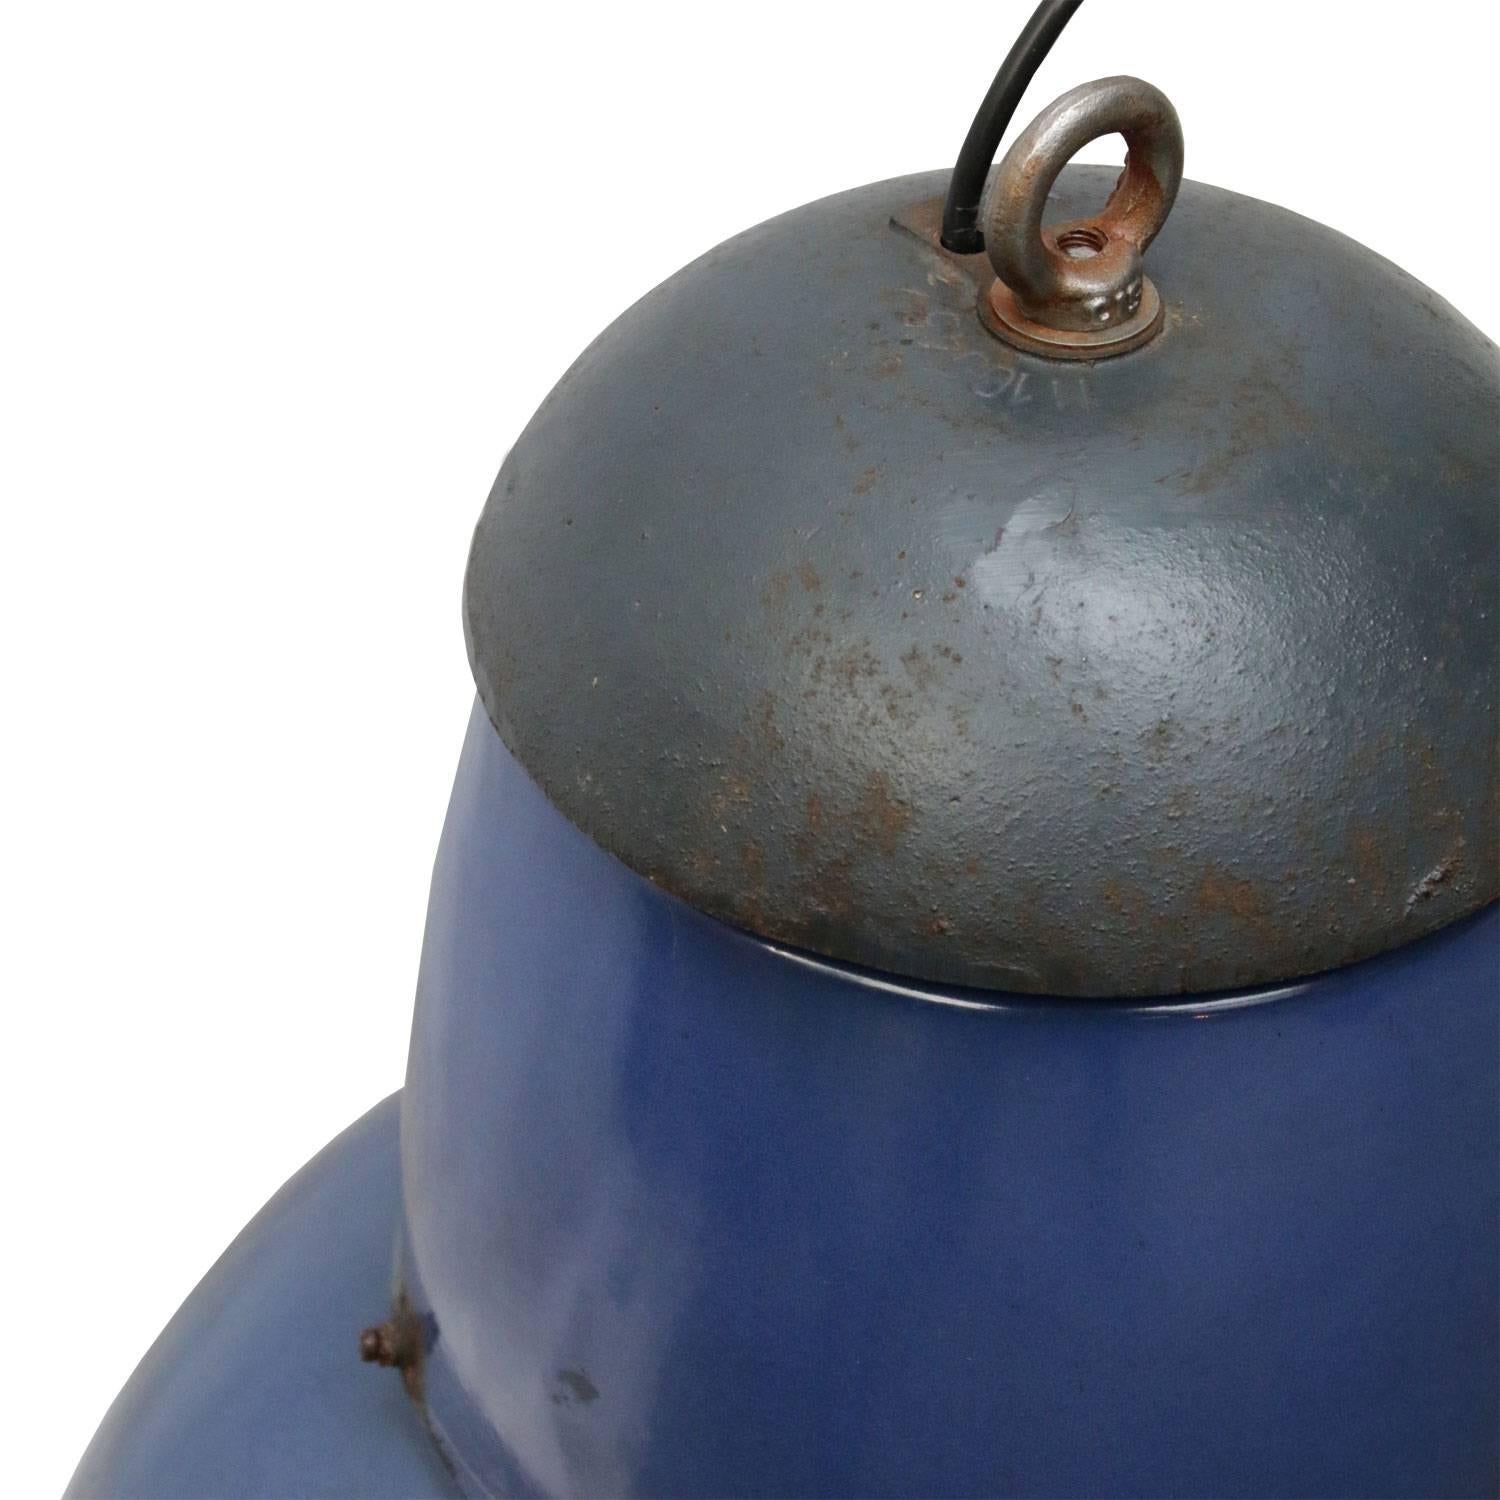 Blue enamel industrial pendant.
Cast iron top. White interior.

Weight: 7.5 kg / 16.5 lb

All lamps have been made suitable by international standards for incandescent light bulbs, energy-efficient and LED bulbs. E26/E27 bulb holders and new wiring